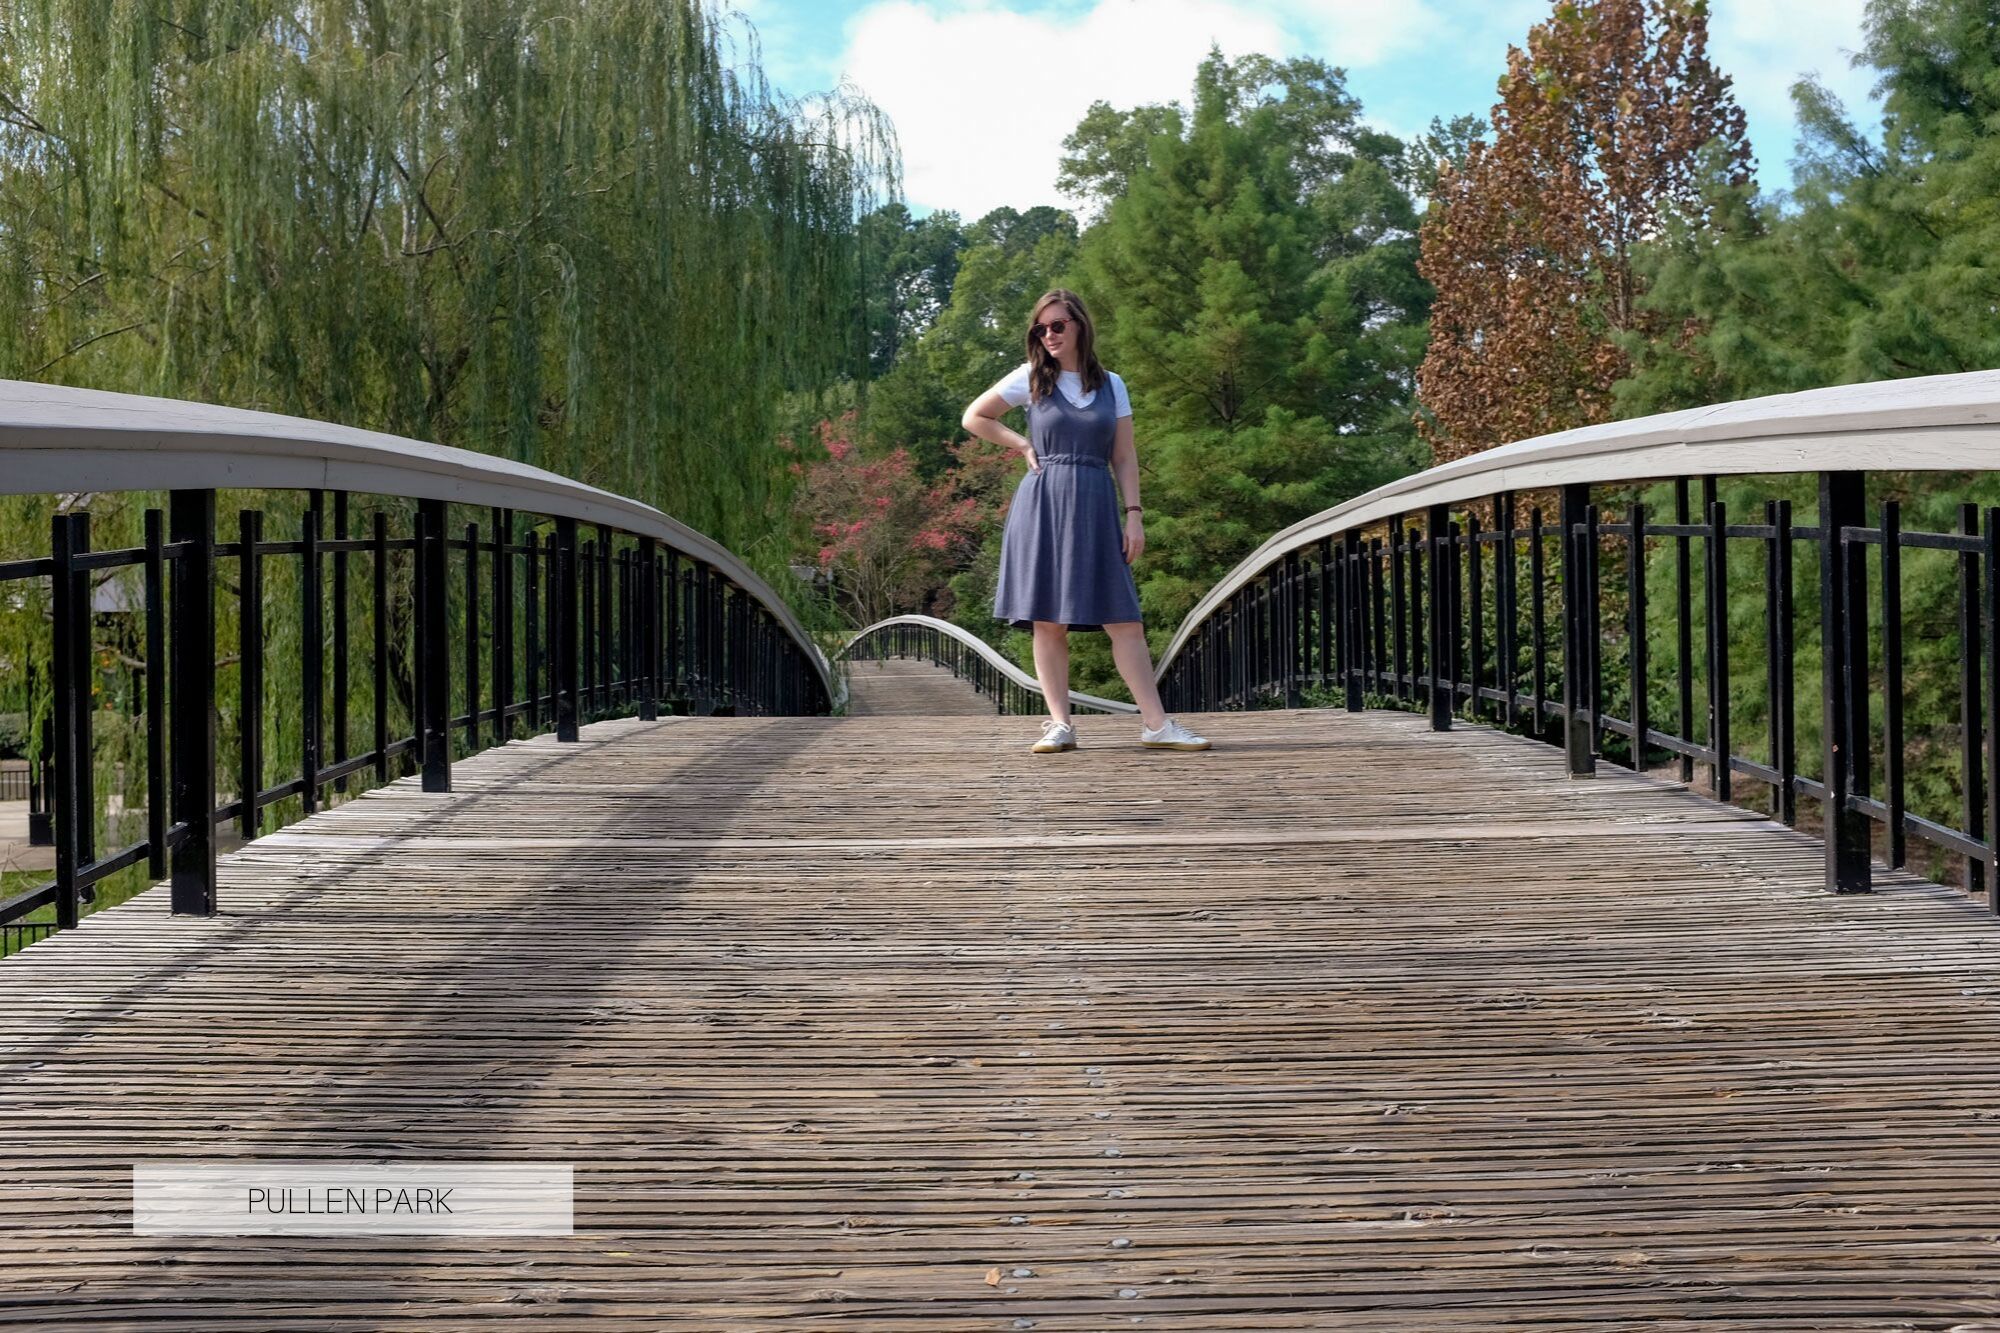 Krystal standing on a bridge in Pullen Park. There are lots of willow and flowering trees in the background